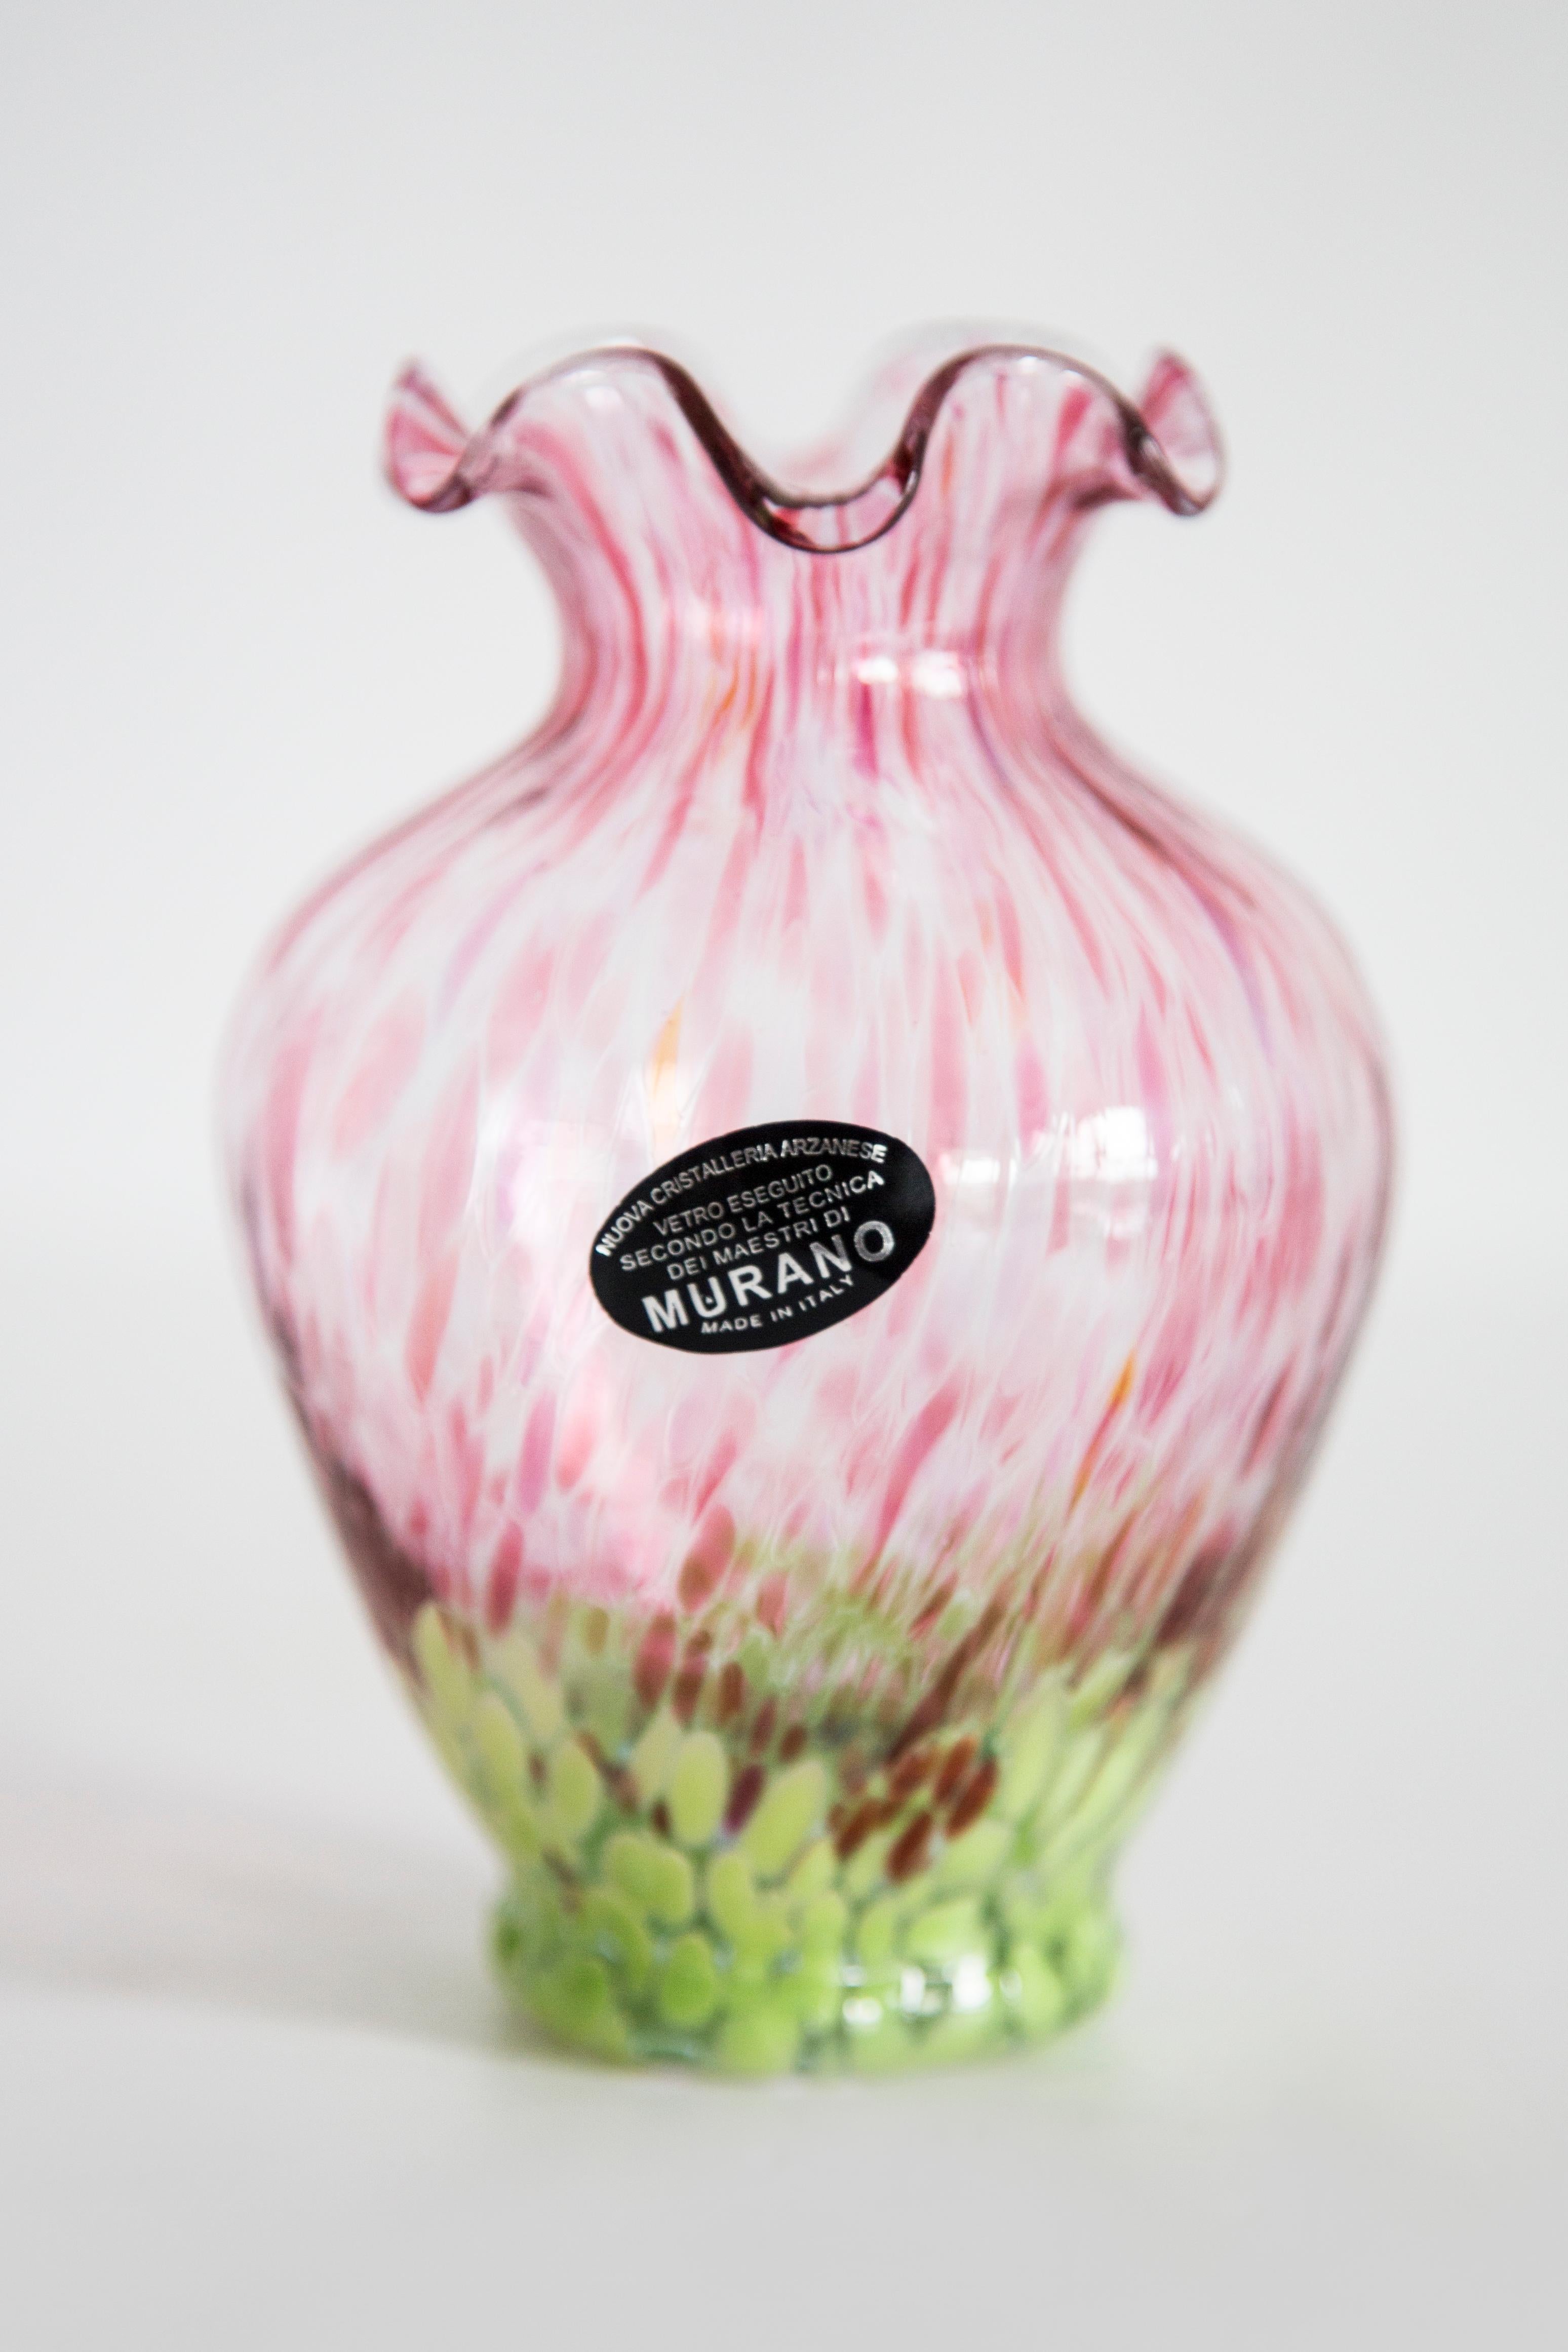 Mid Century Vintage Pink and Green Small Murano Vase, Italy, 1960s For Sale 3